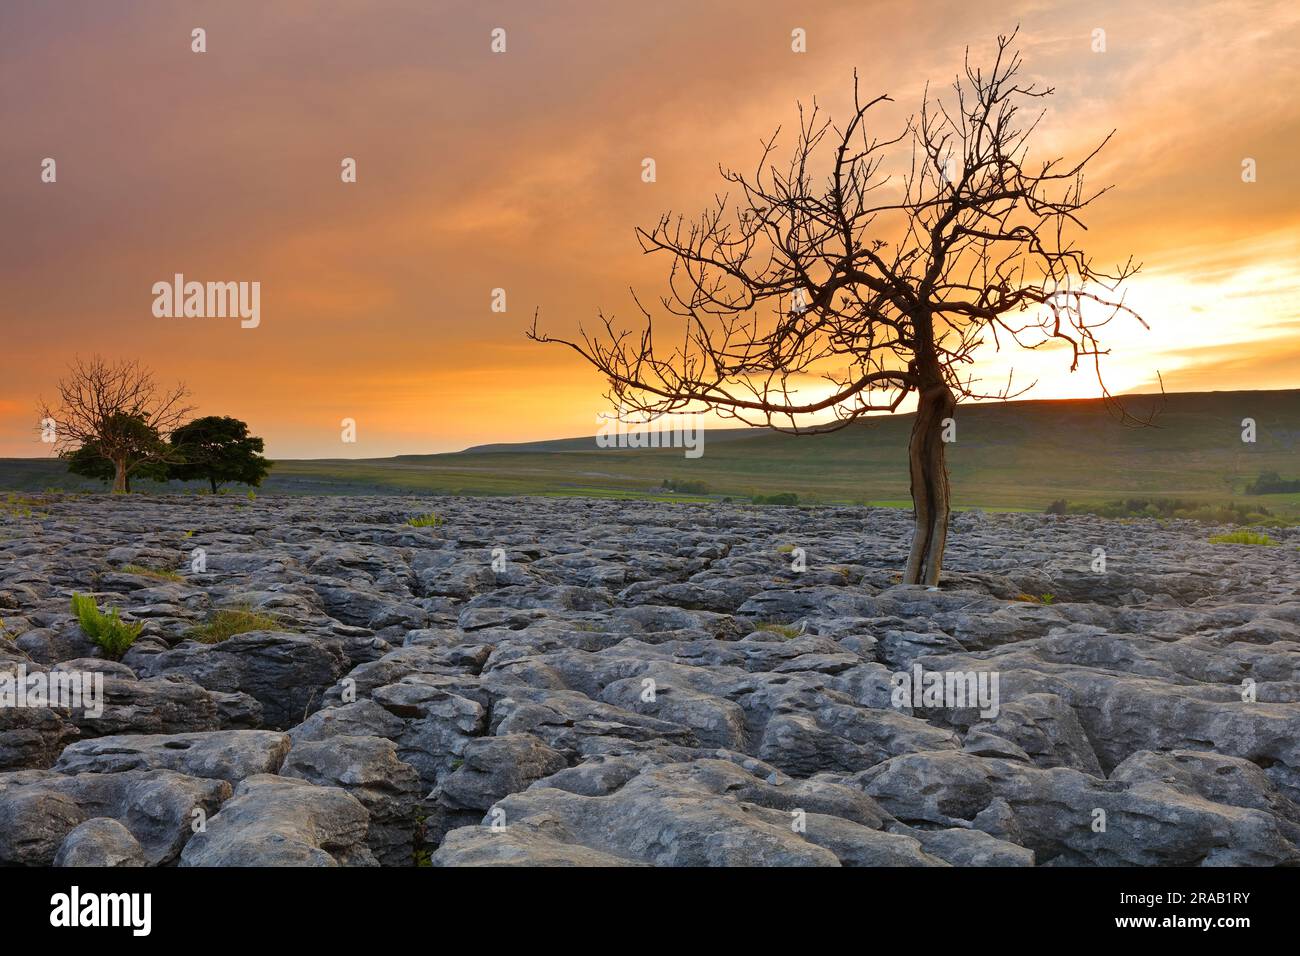 Lone tree growing out of limestone pavement, Yorkshire Dales National Park, England, UK. Stock Photo